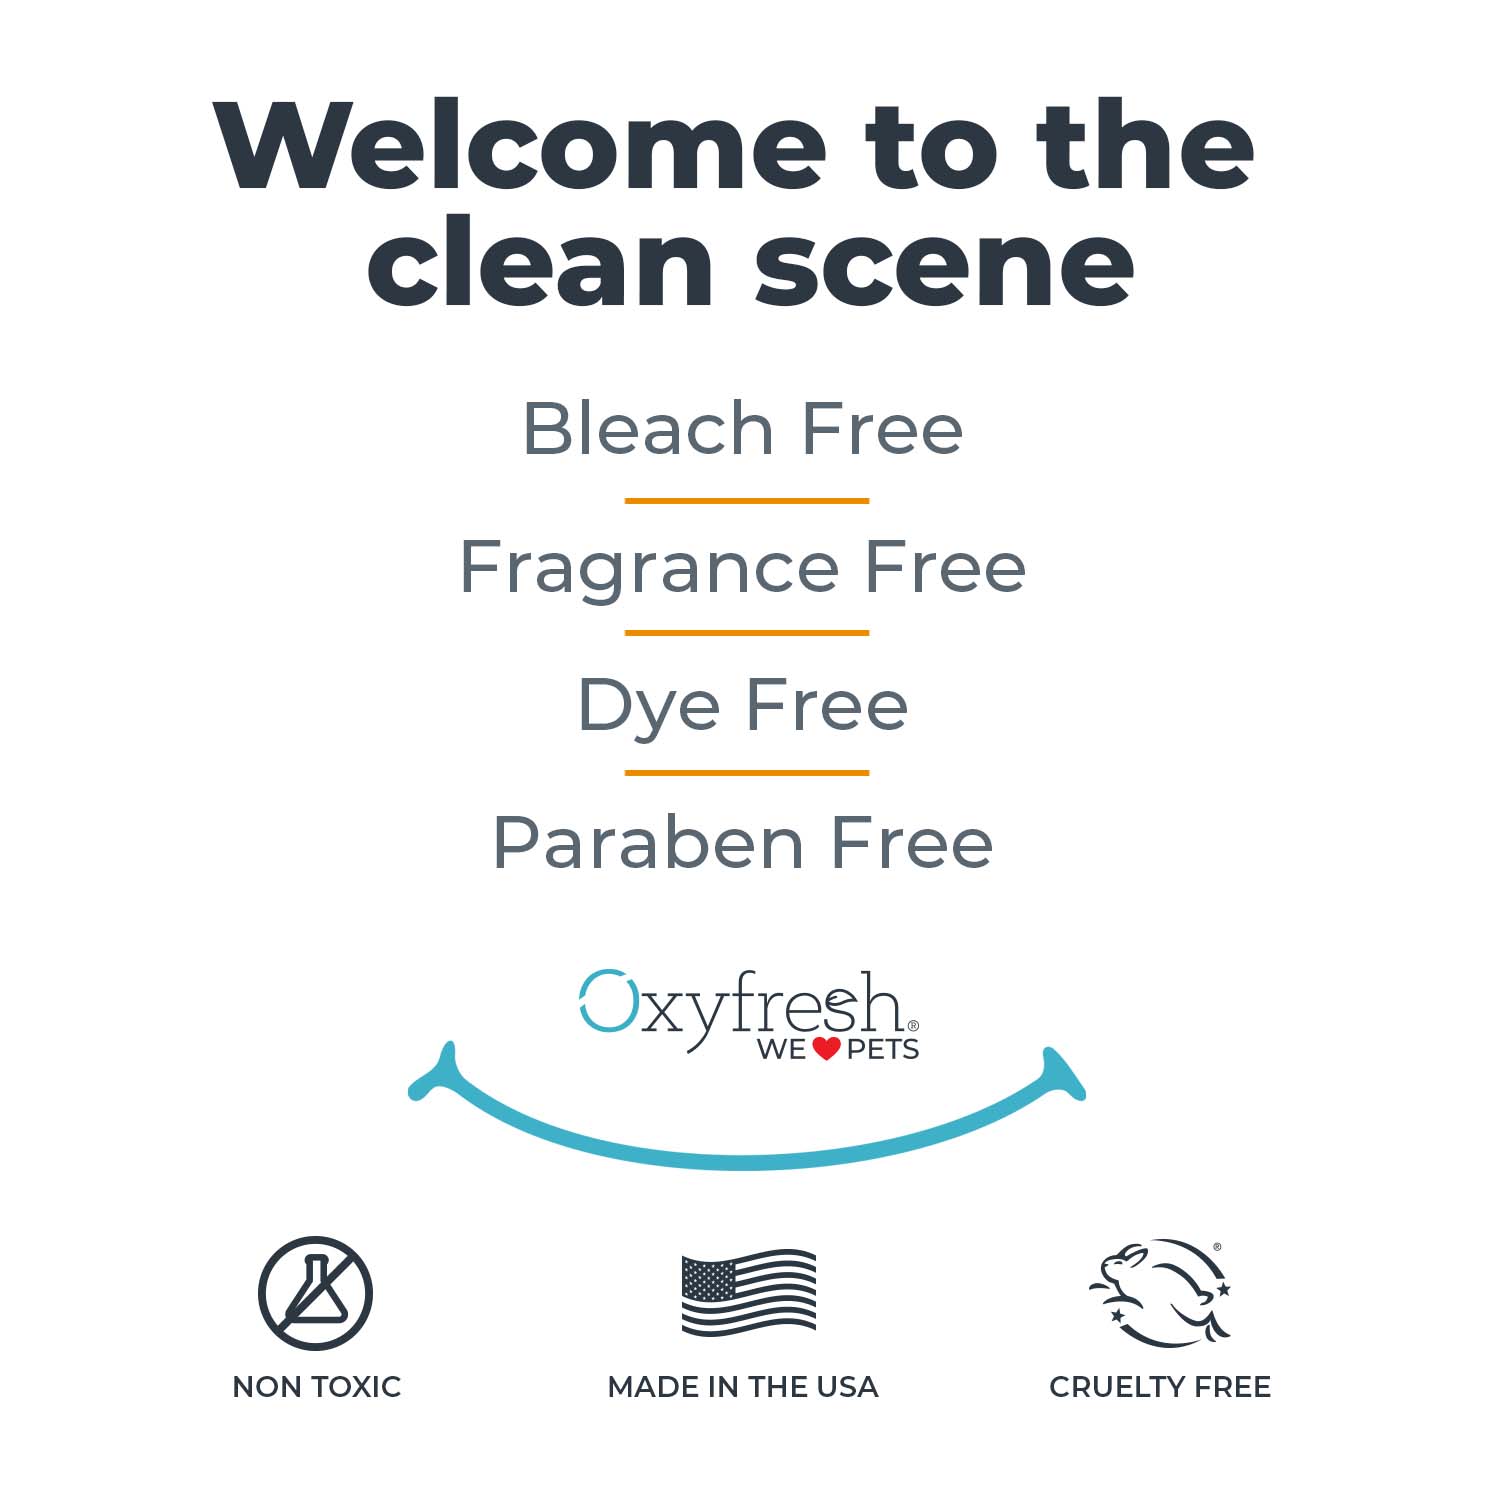 oxyfresh-pet-deodorizer-is-free-of-bleach-fragrance-dyes-and-parabens